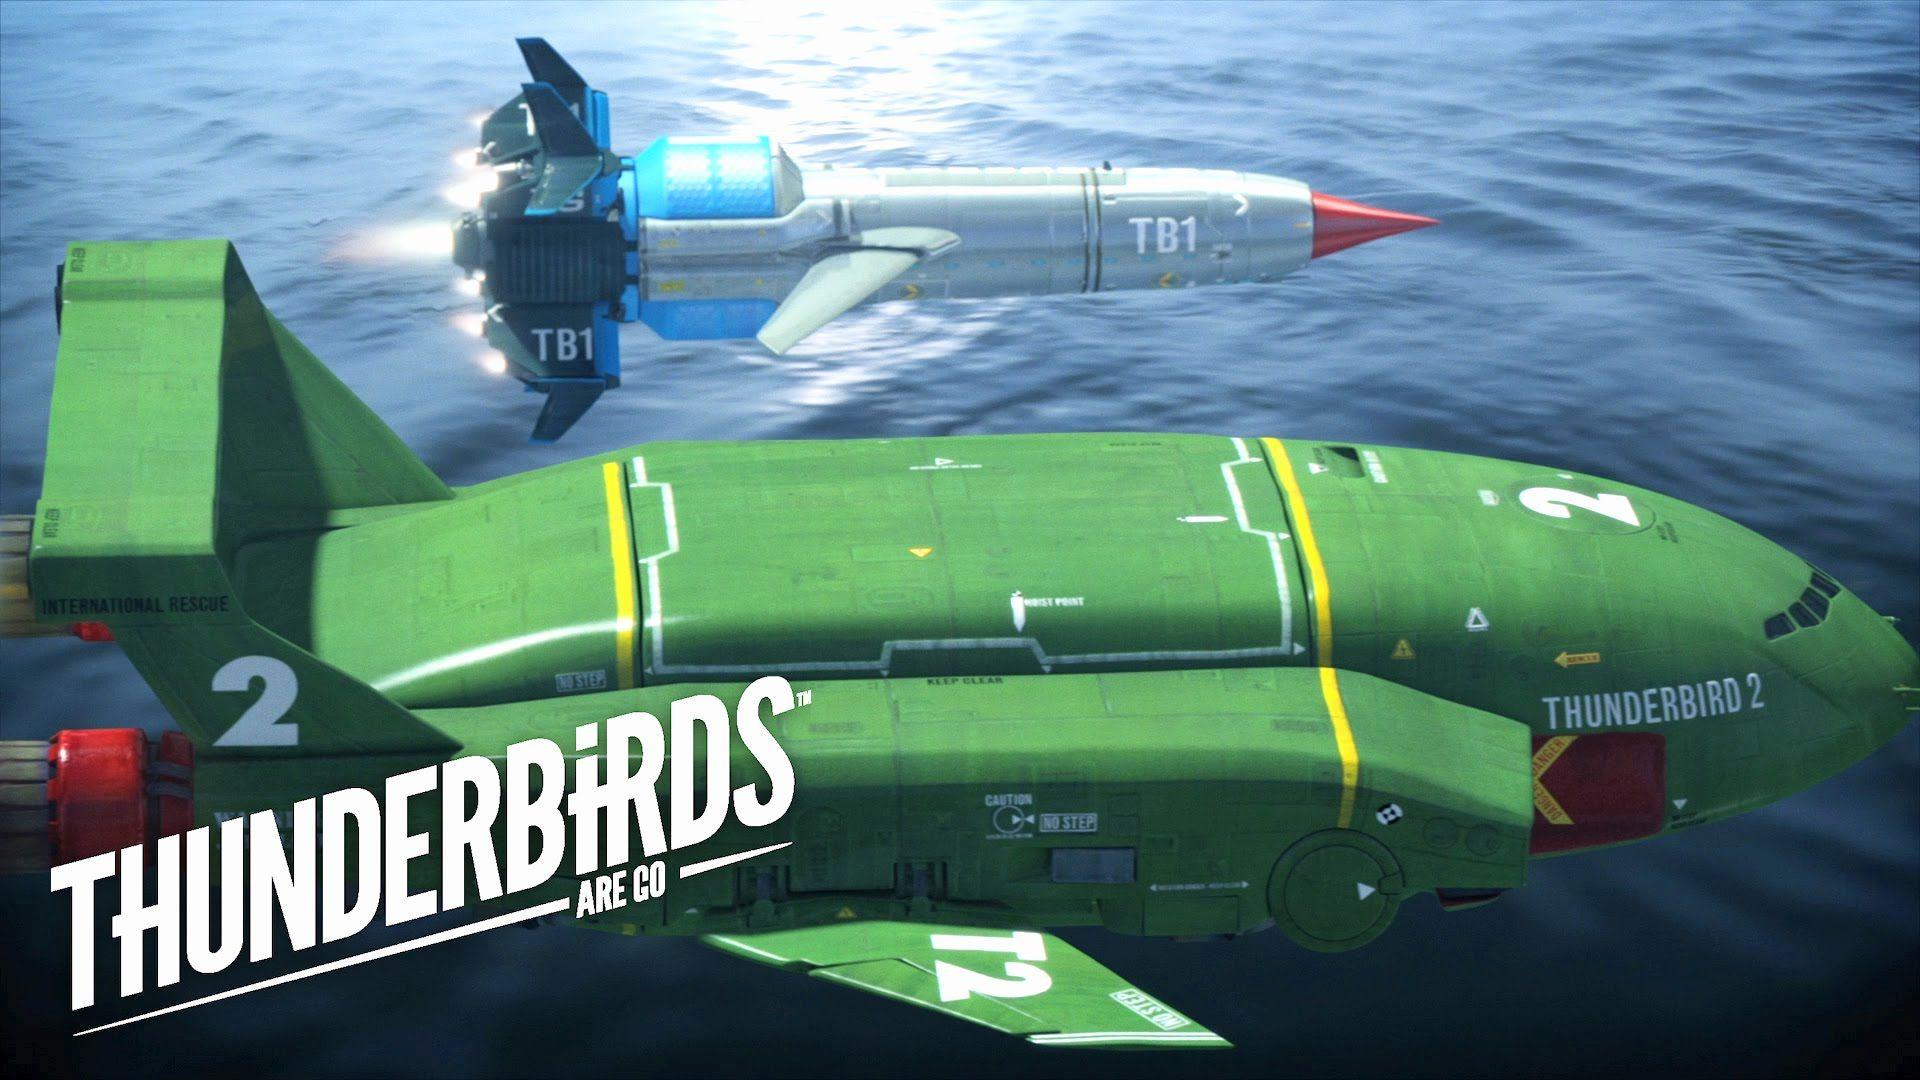 Thunderbird 2 And TB1 HD Wallpaper. Background Imagex1080